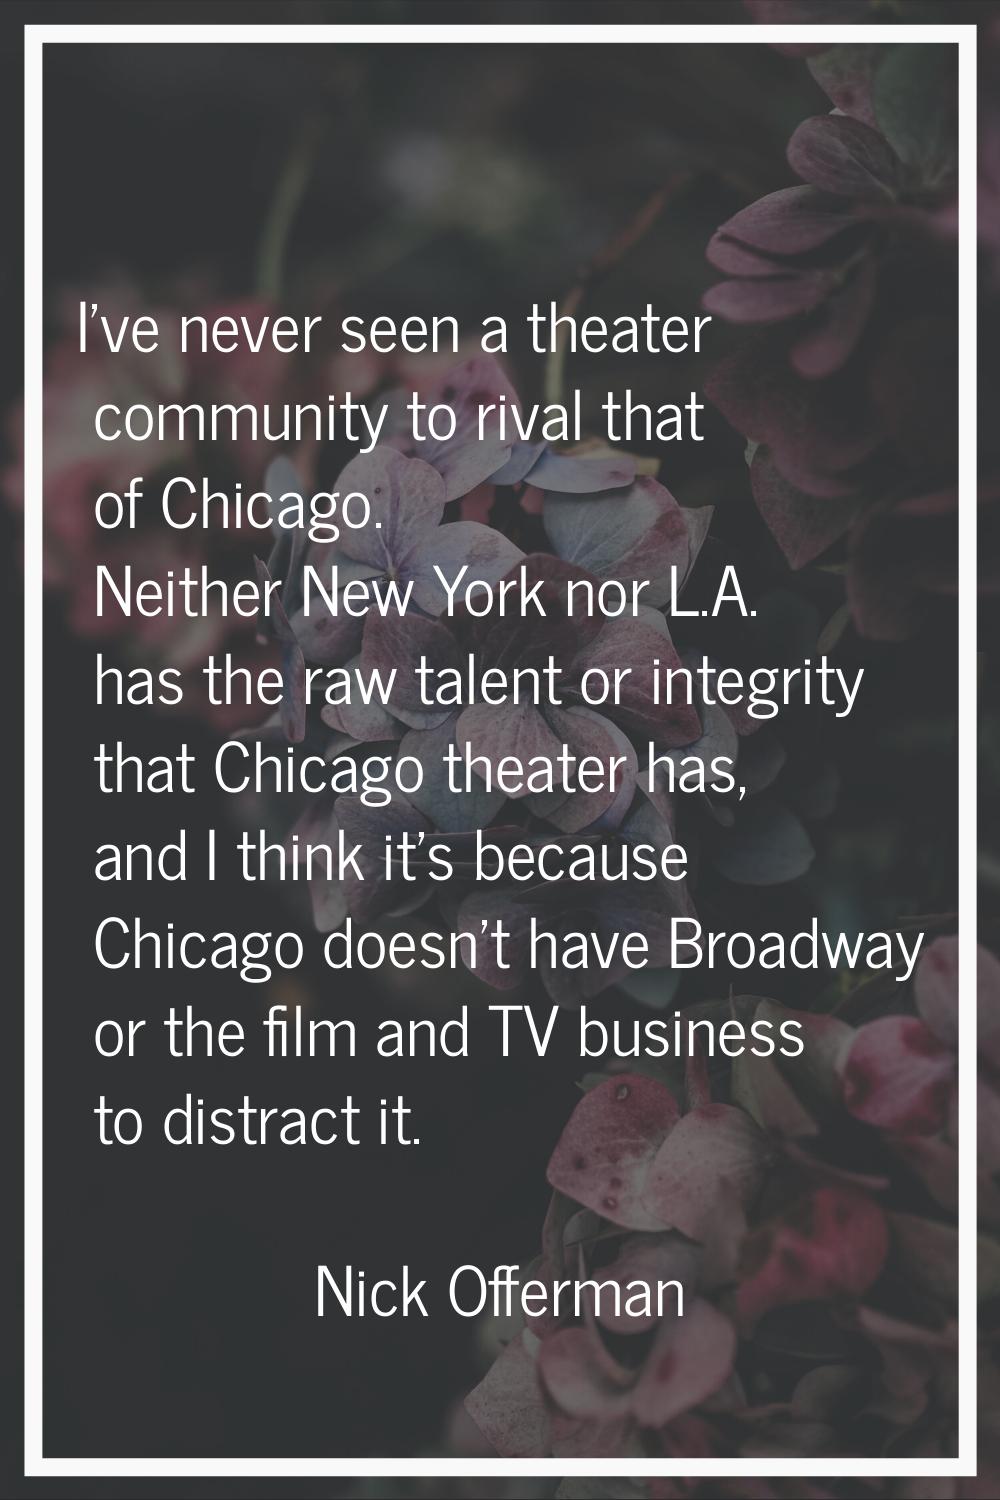 I've never seen a theater community to rival that of Chicago. Neither New York nor L.A. has the raw